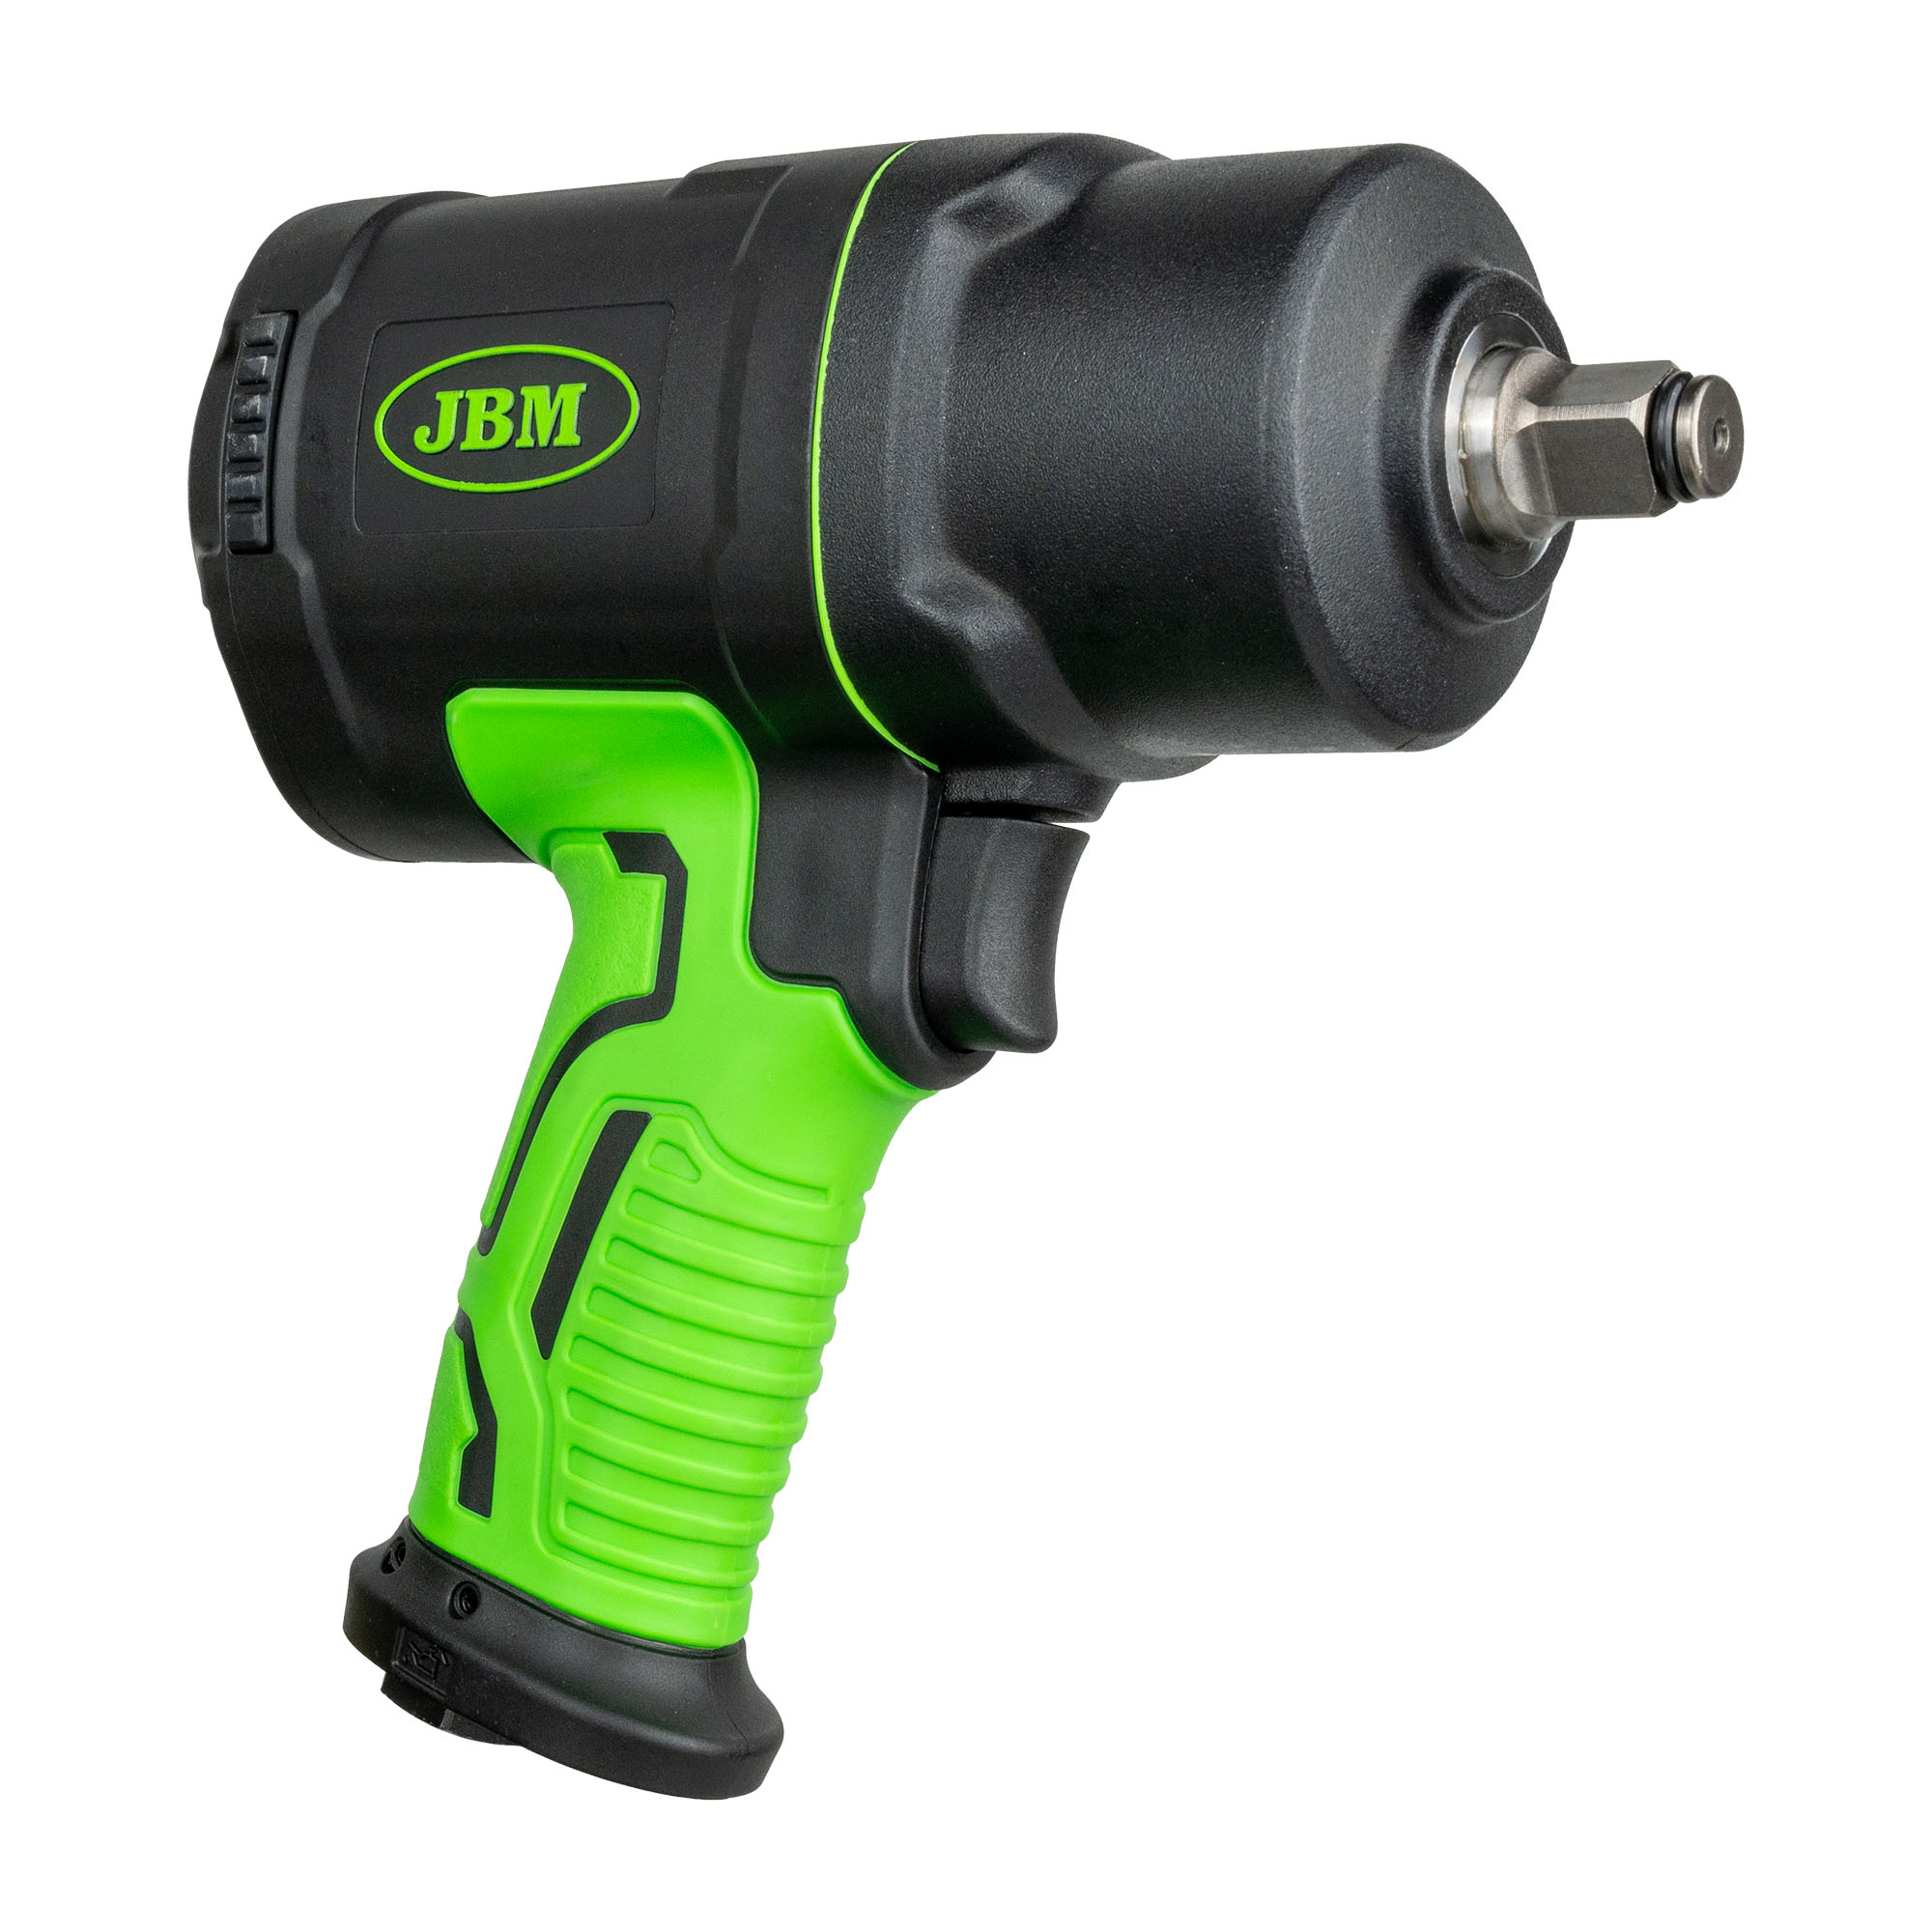  IMPACT WRENCH 1/2" 1750NM